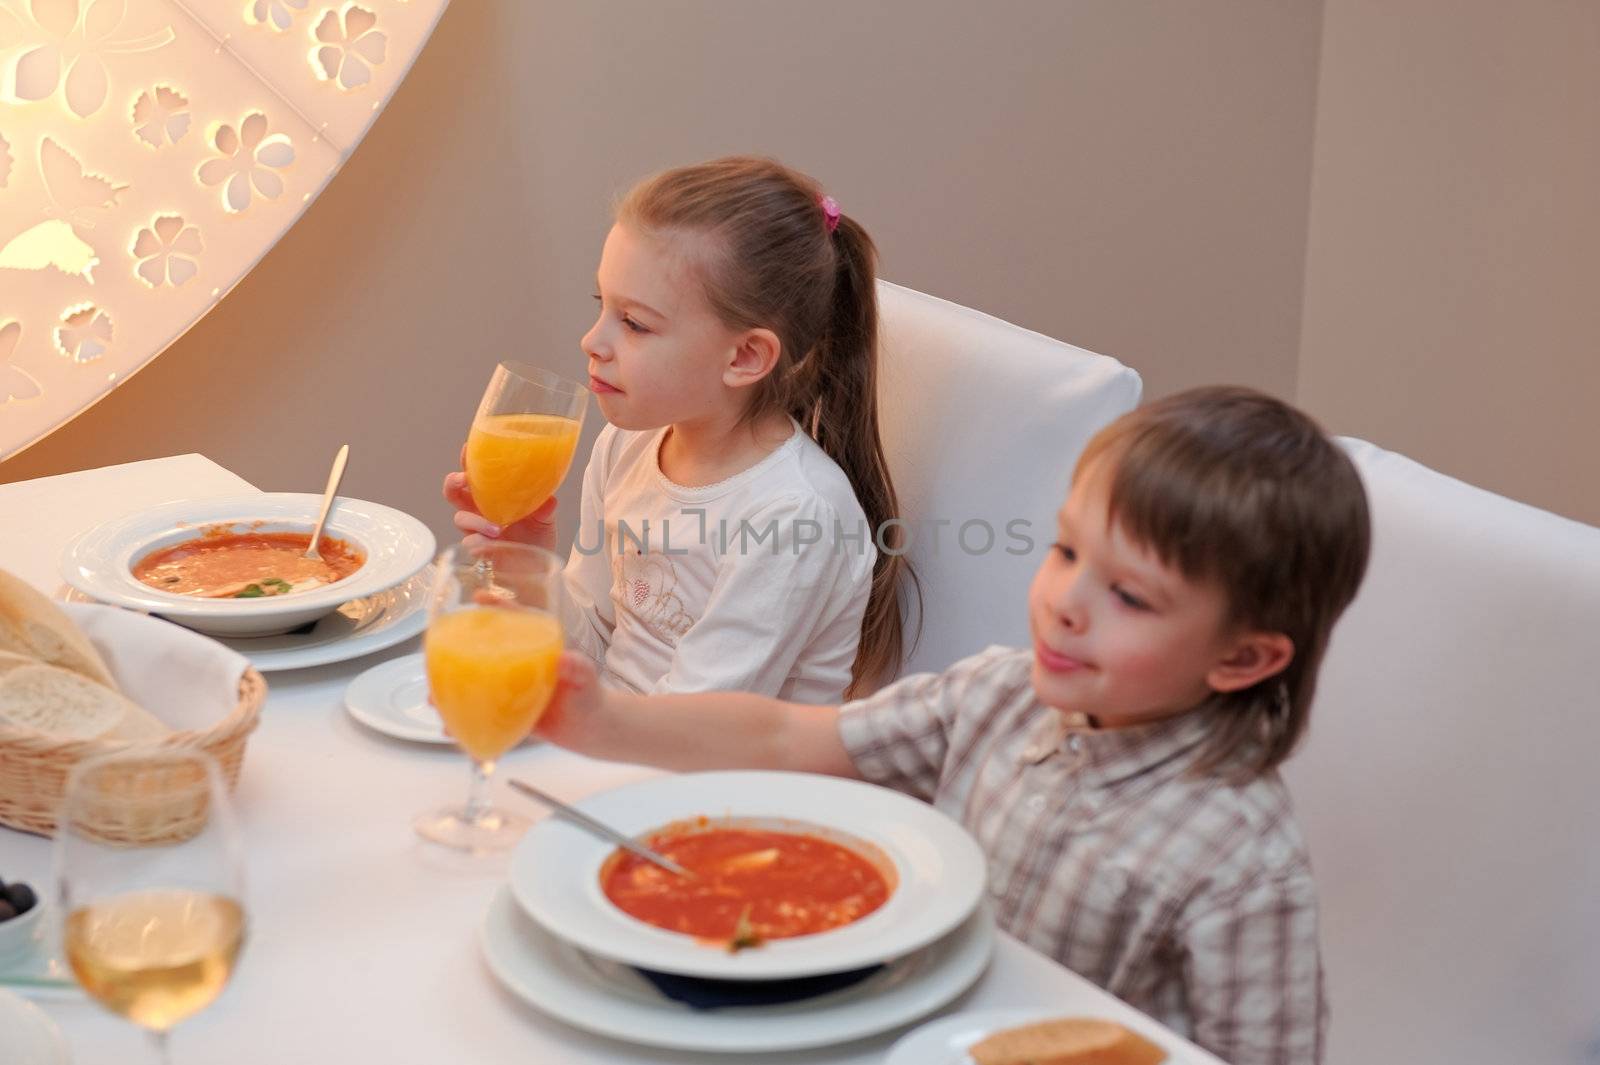 Sister and brother enjoying meal sitting at restaurant table. Girl in focus, boy out of focus.